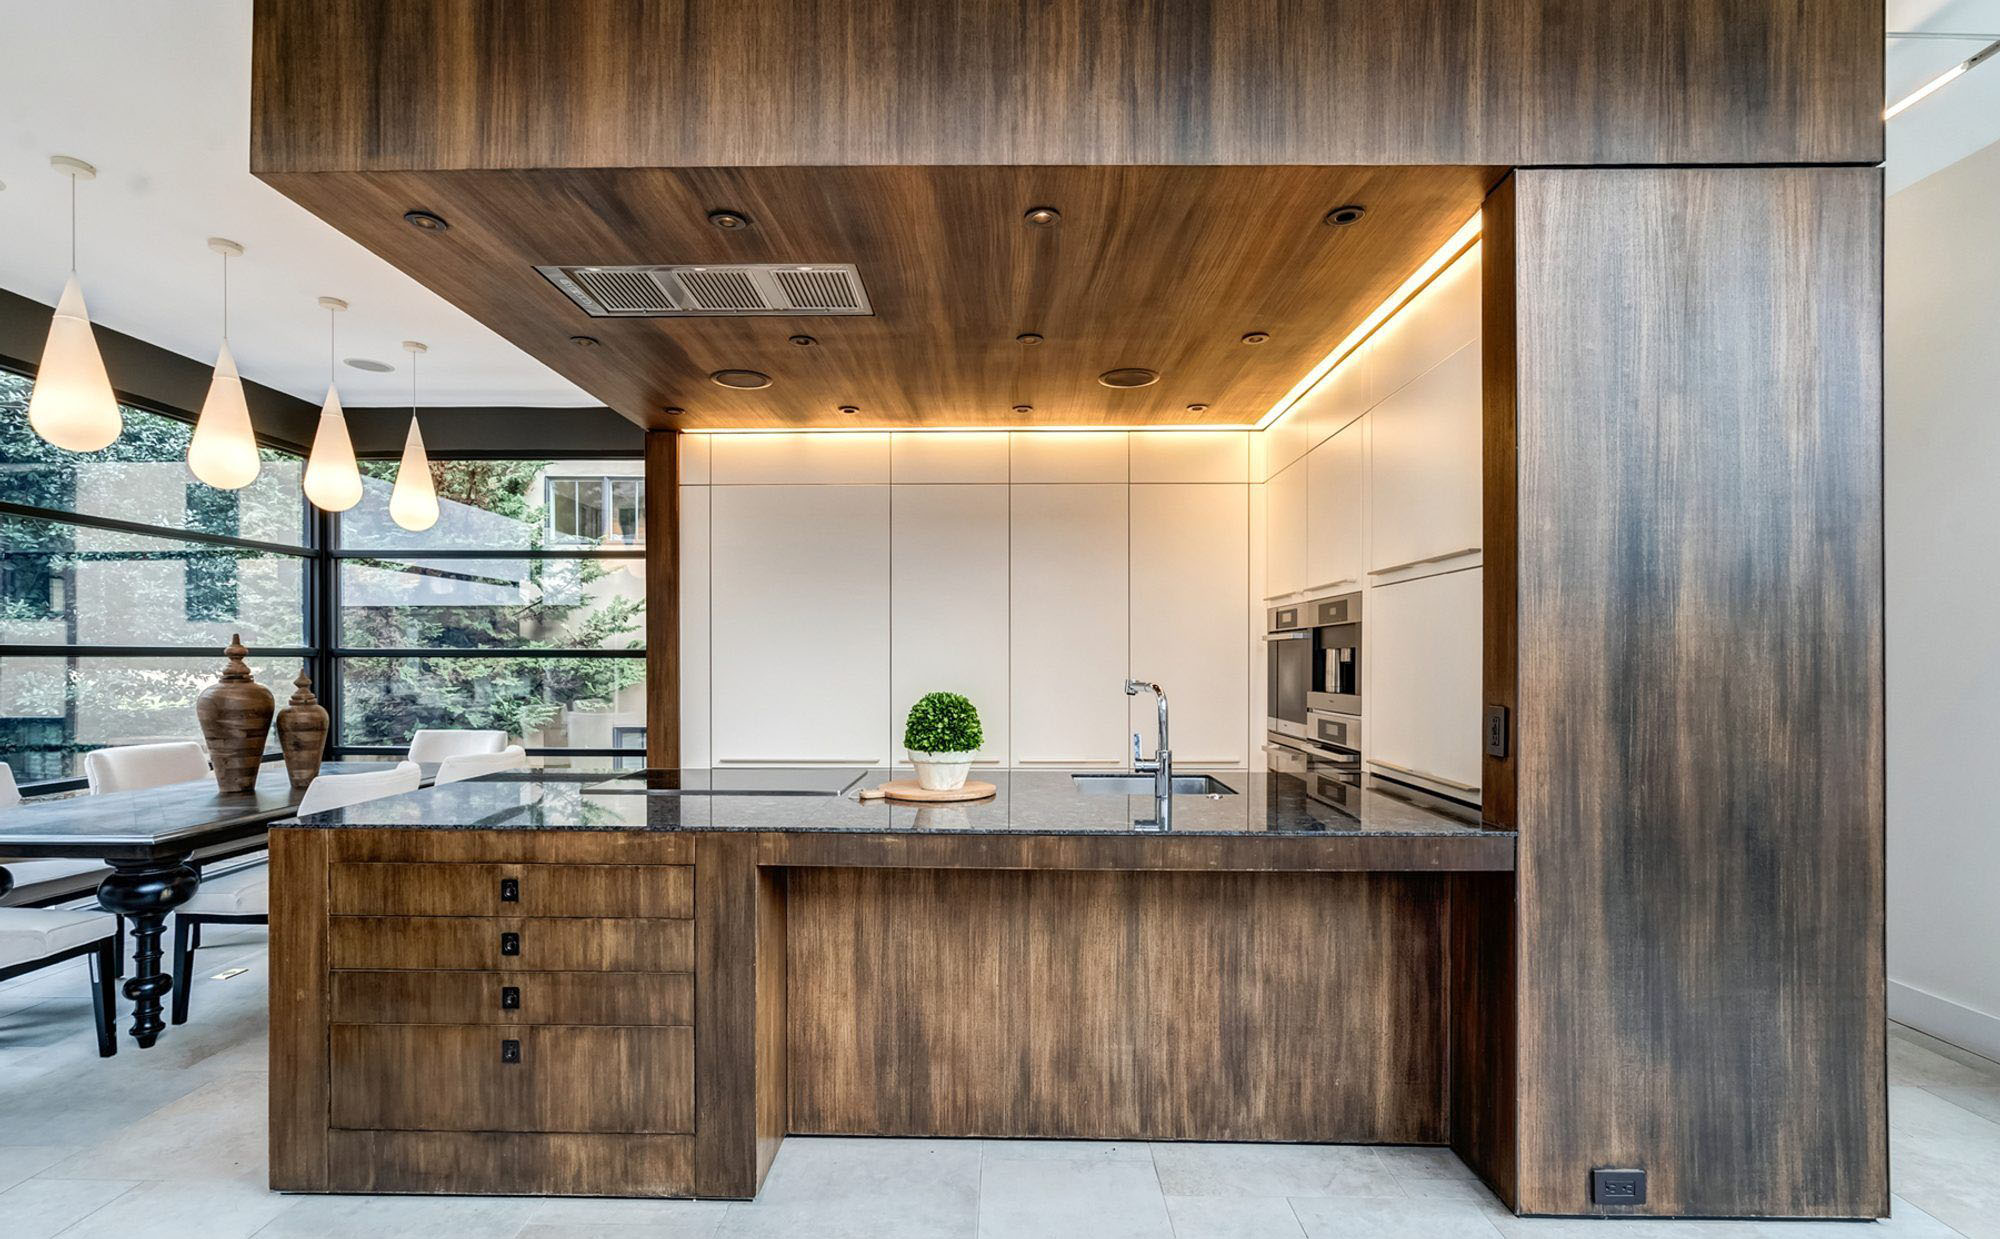 Modern kitchen with drop ceiling finished with wood paneling. Matching wood peninsula island with black granite.